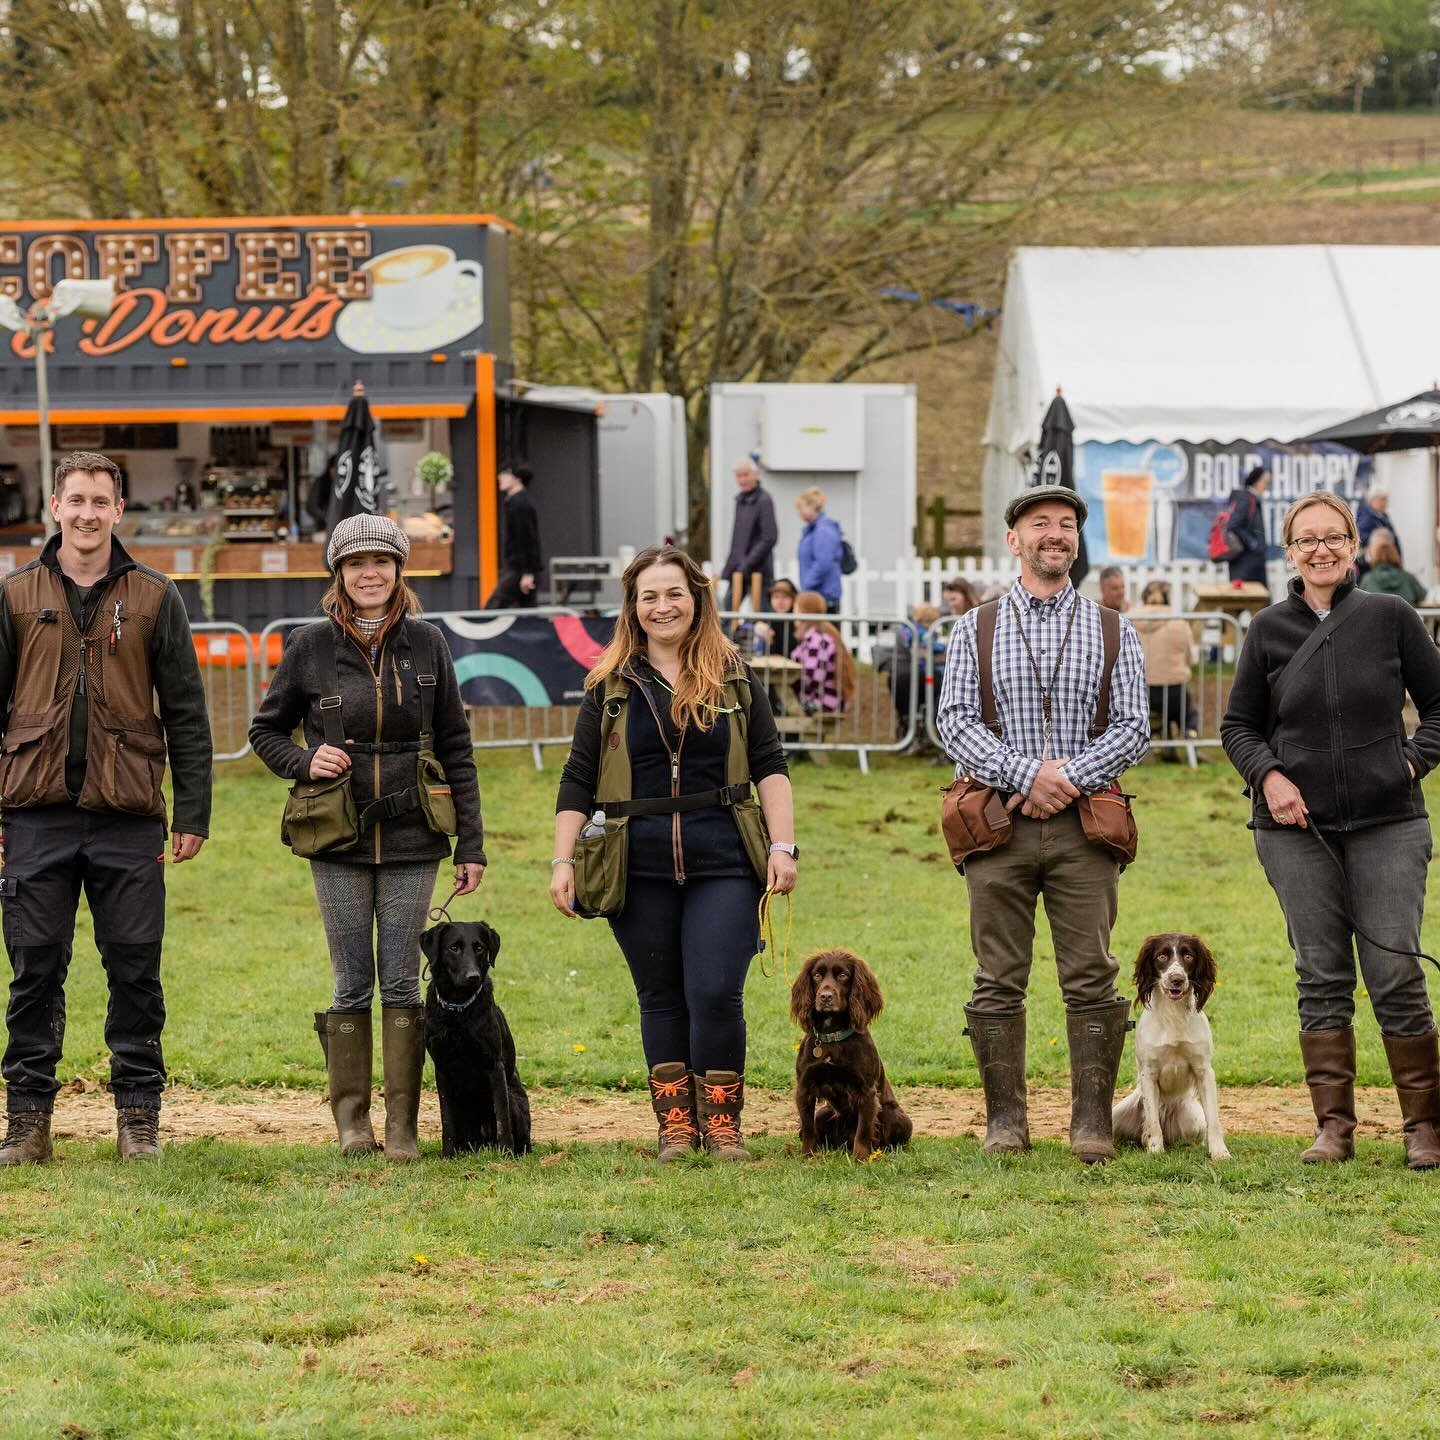 A great day out last weekend at the @dorsetspringshow by kind invitation of fellow instructor Lucy Nolan of @adharadogtraining. Together with Lucy, Cheryl and Joe of @southdowns_dog_services and Richard of @countryhandlers_dogtraining we were part of